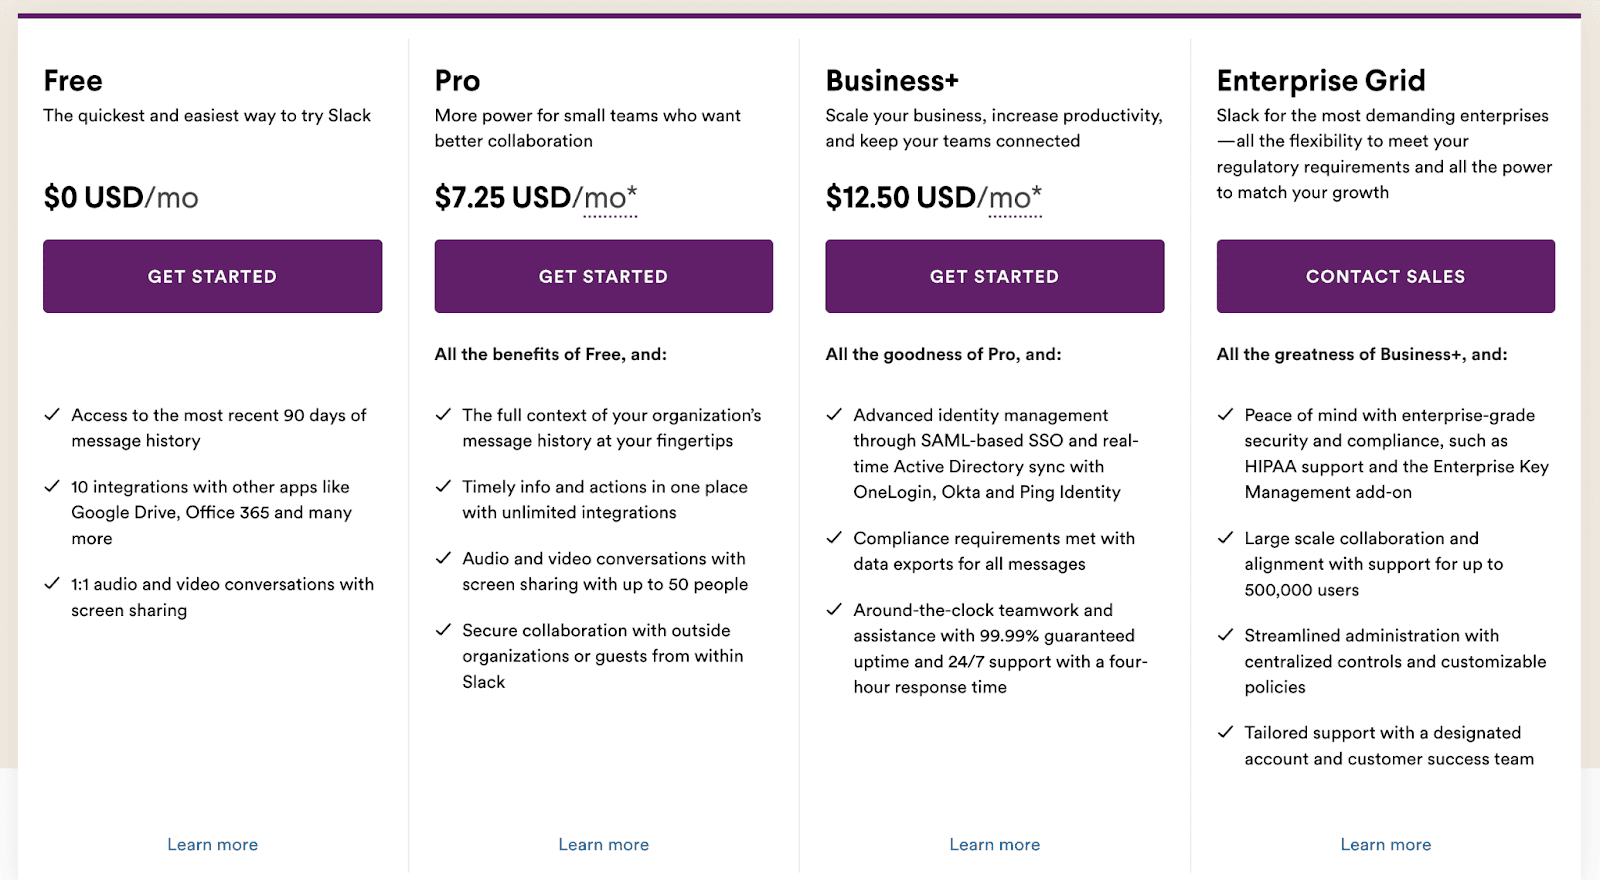 Slack plans and pricing